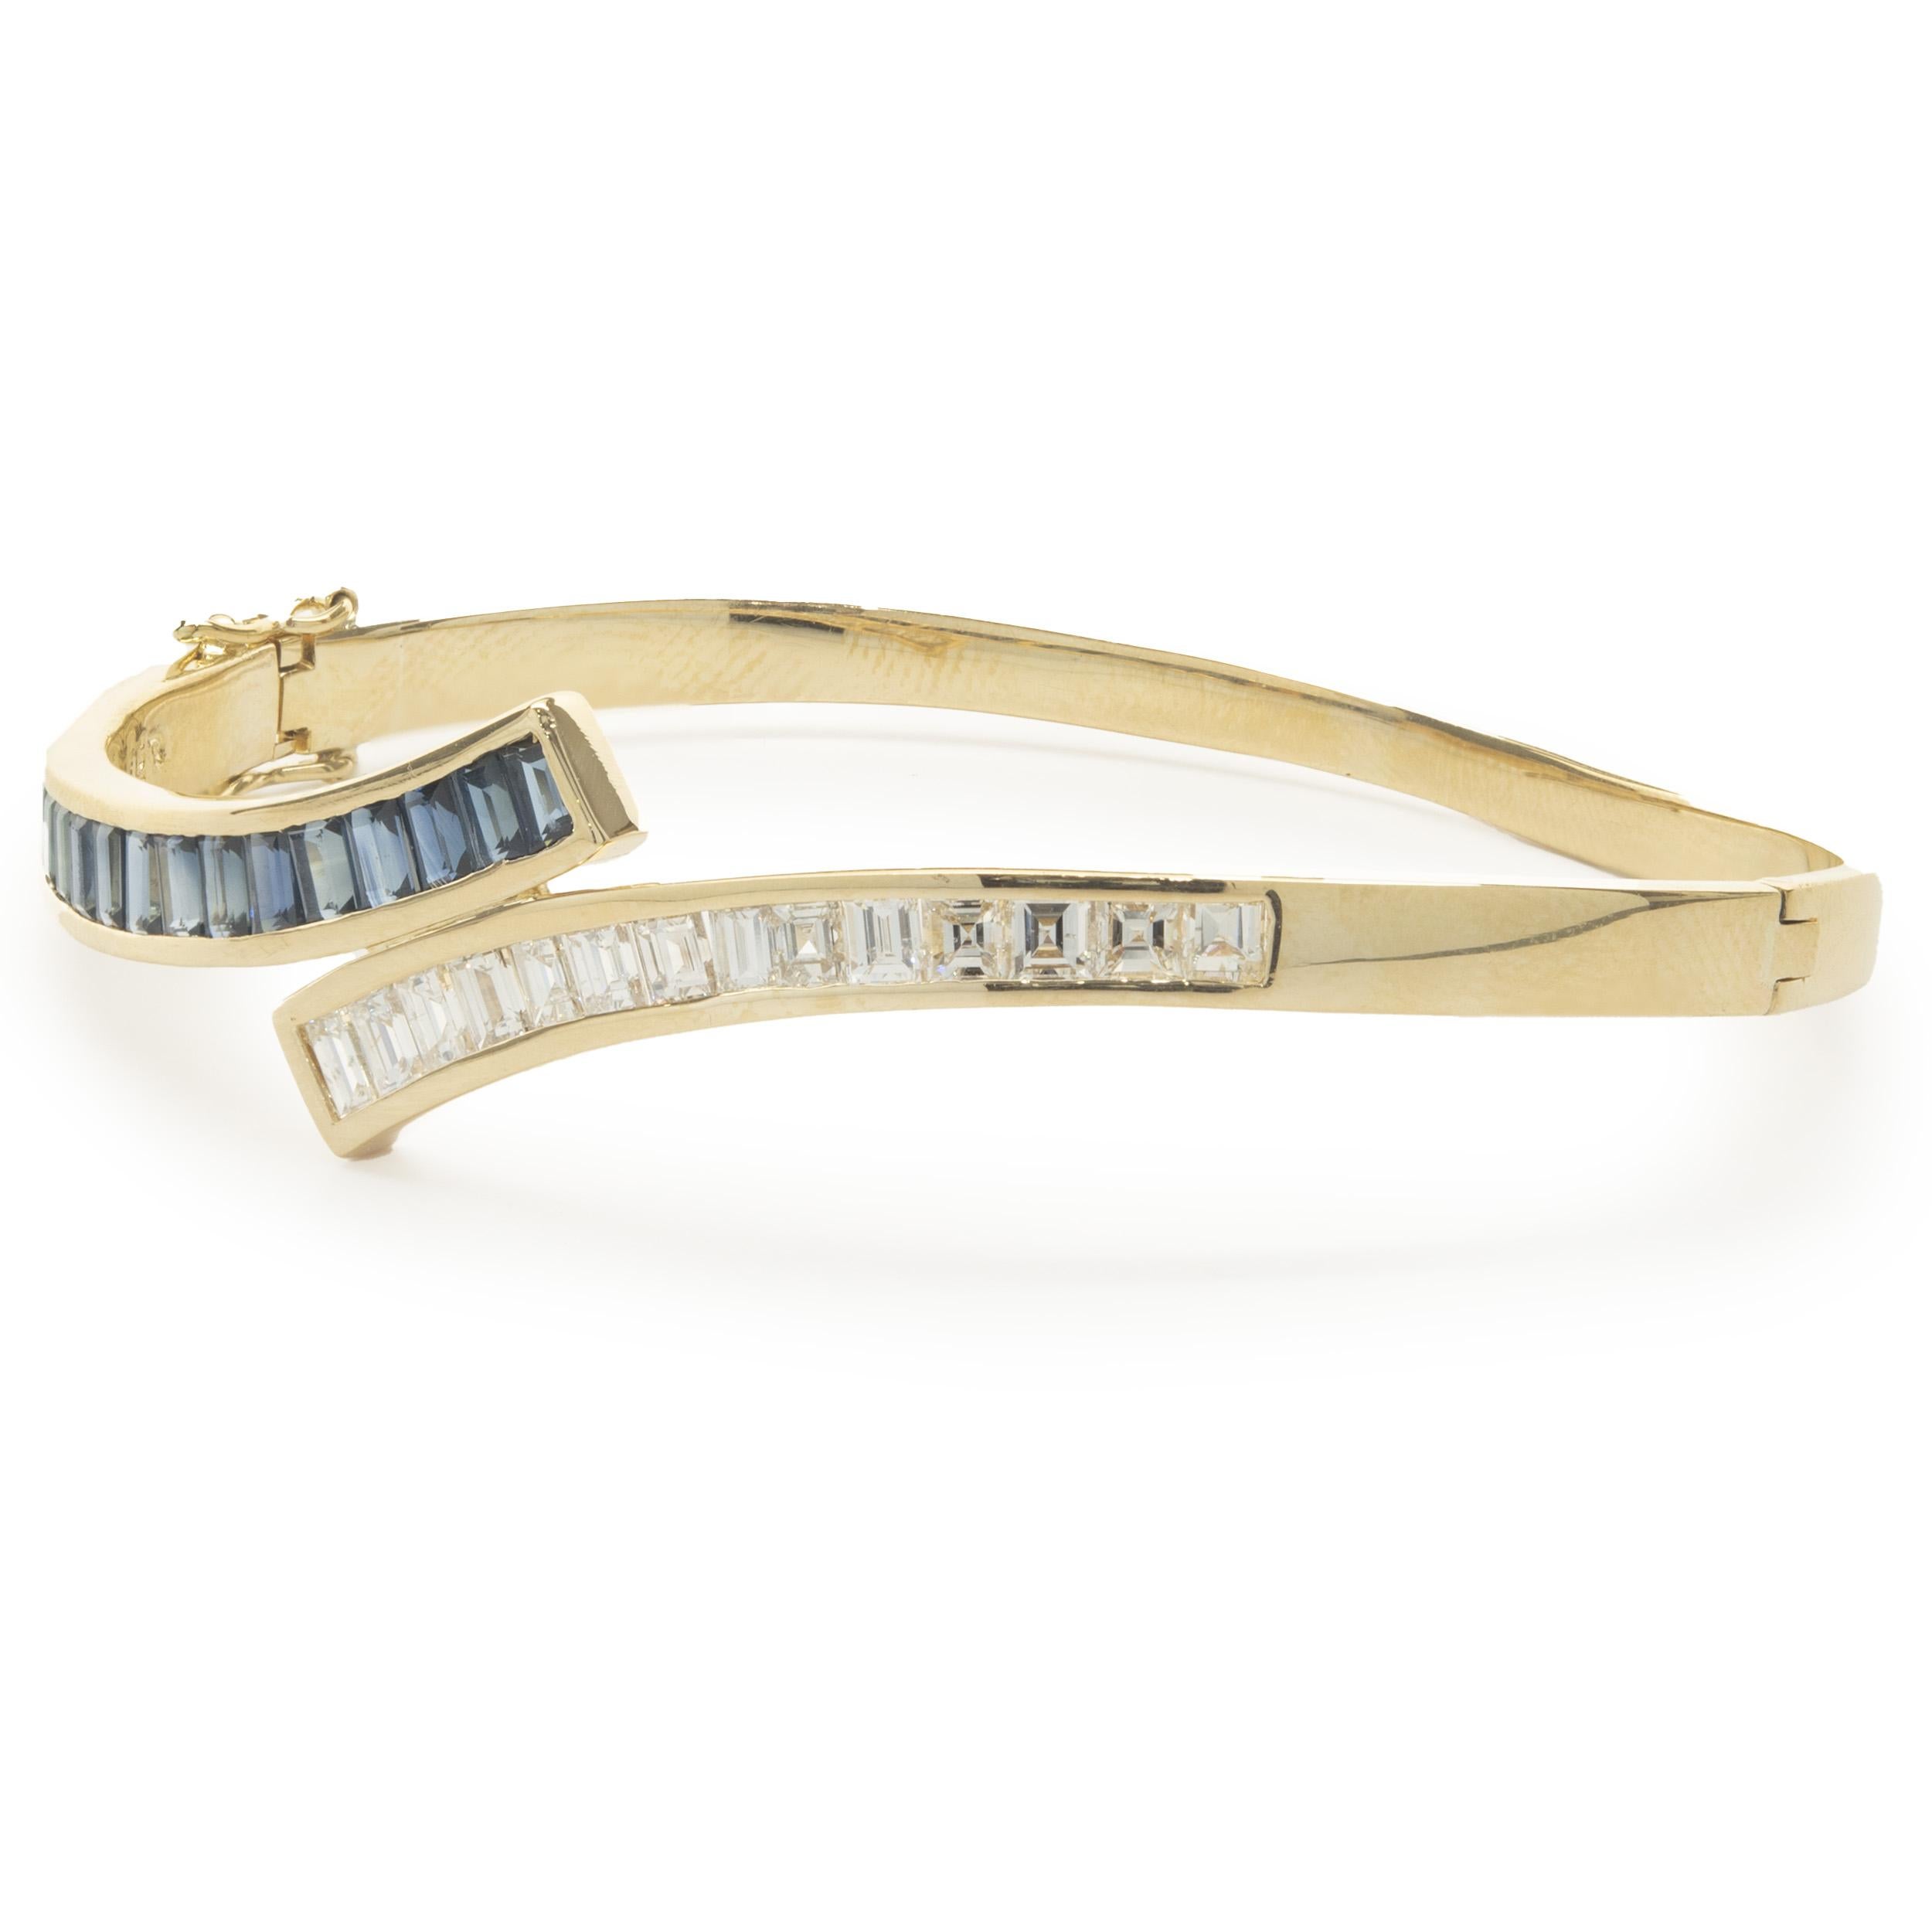 Designer: custom
Material: 14K yellow gold
Diamond: 14 baguette cut = 1.04cttw
Color: G
Clarity: SI1
Weight:  17.49 grams
Dimensions: bracelet will fit up to a 7.25-inch wrist